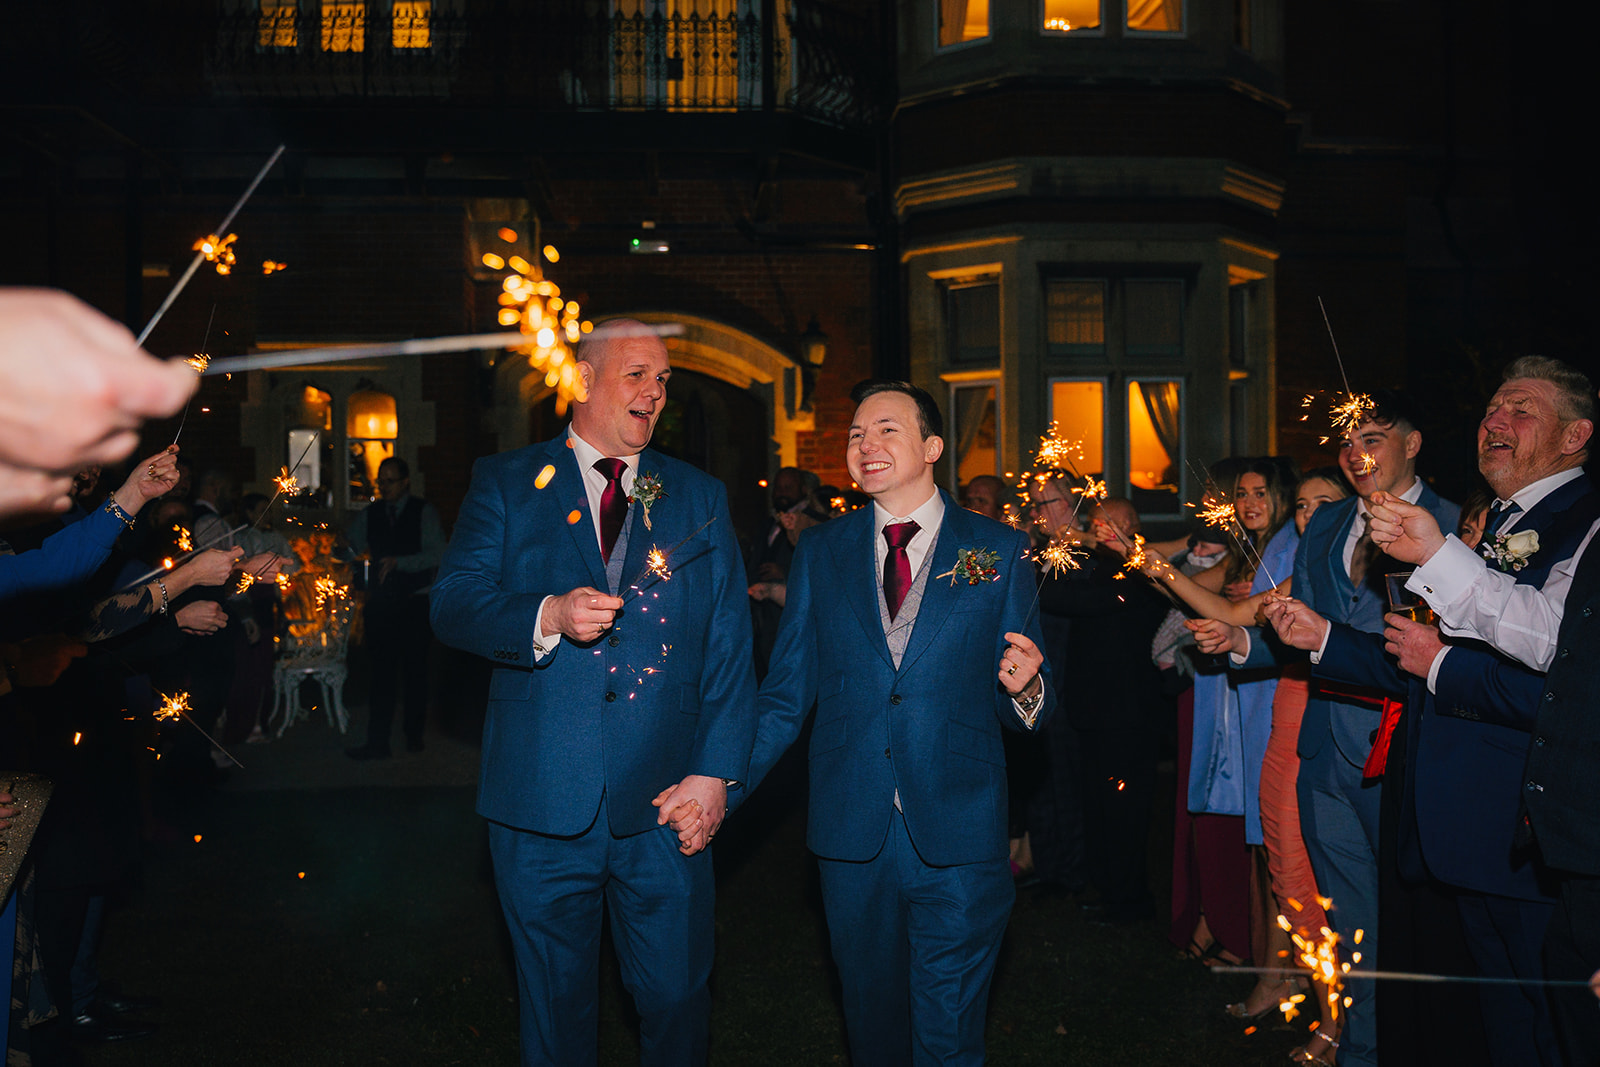 guests line up either side as the two grooms walk hand in hand down an aisle, waving sparklers